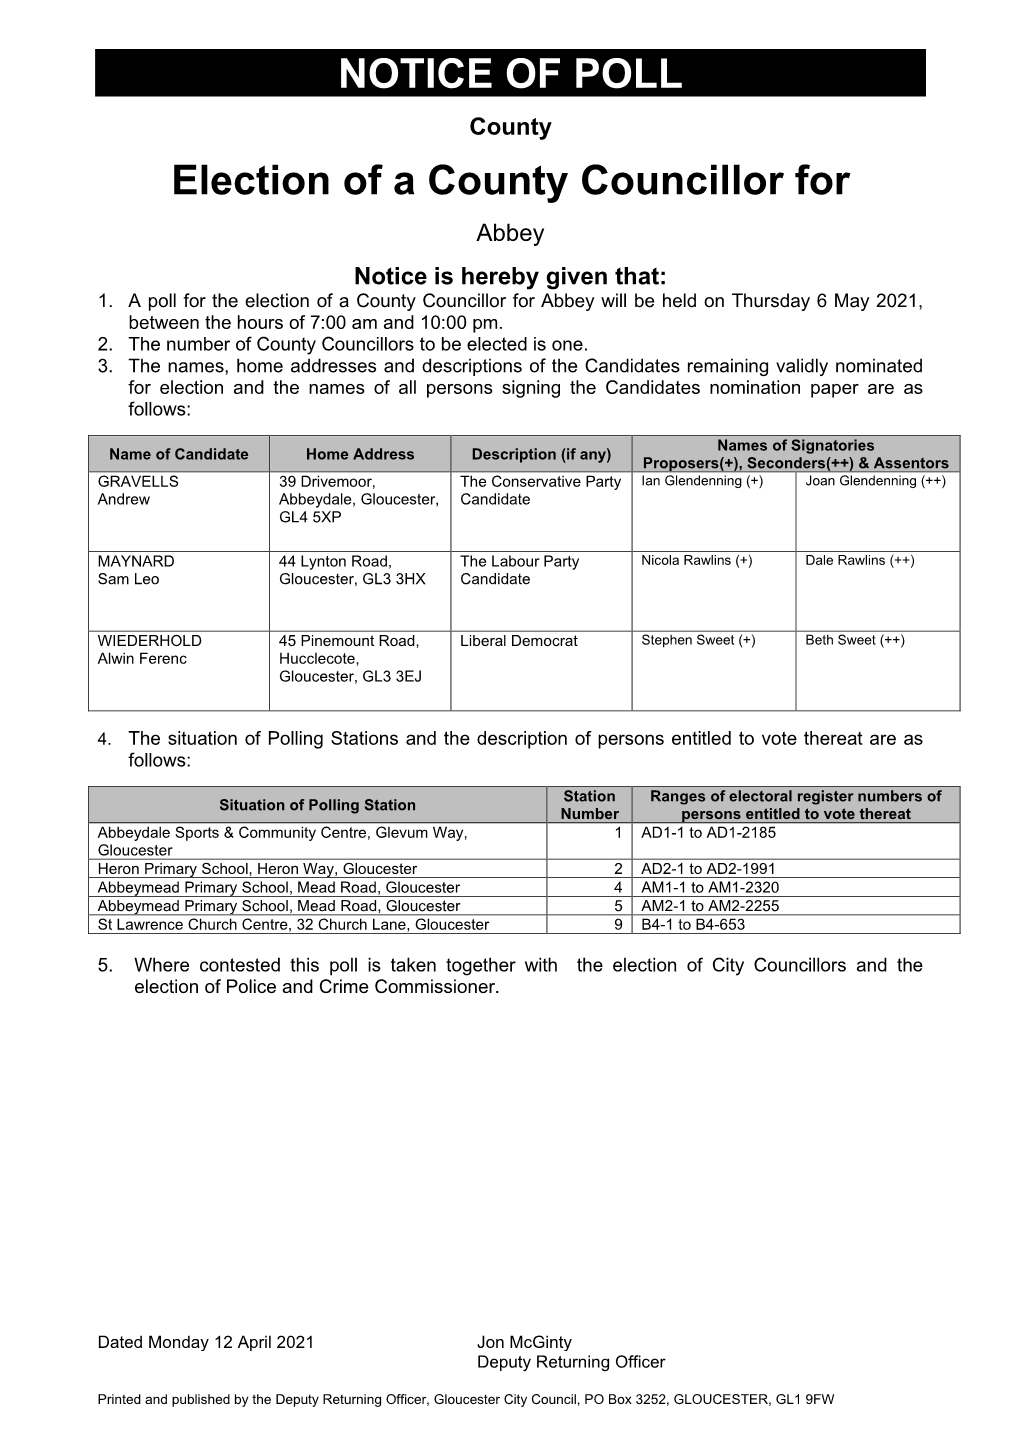 NOTICE of POLL Election of a County